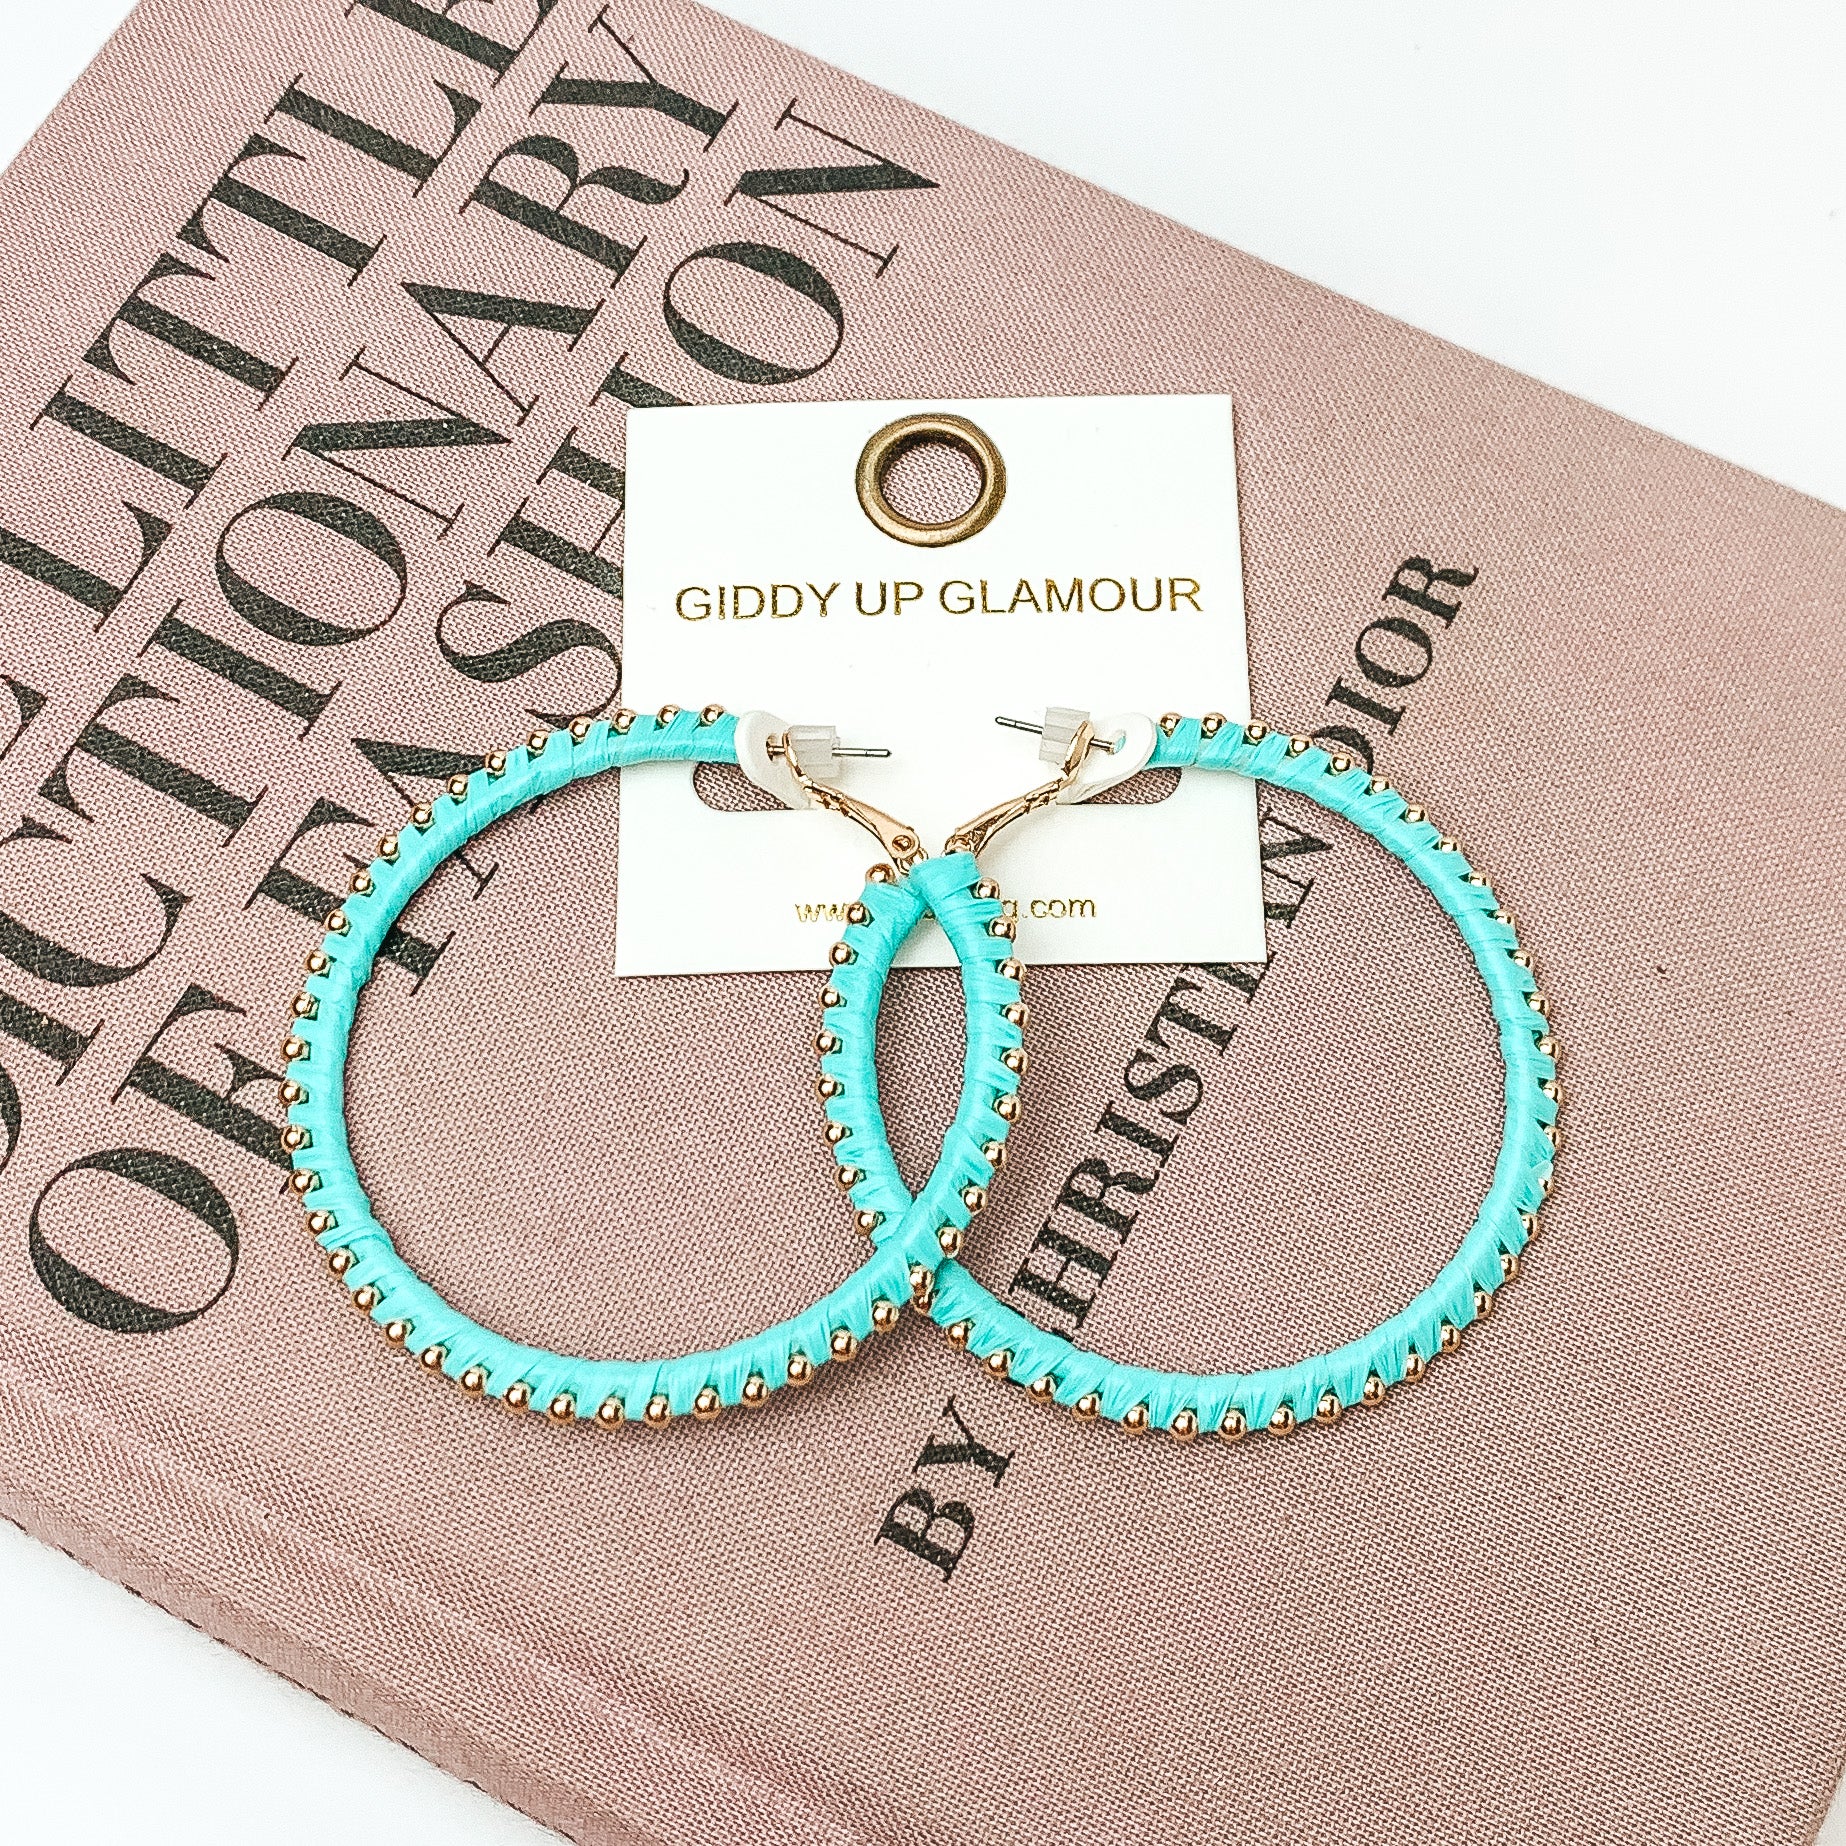 Pictured are circle light blue hoop earrings with gold beads around it. They are pictured with a pink fashion journal on a white background.